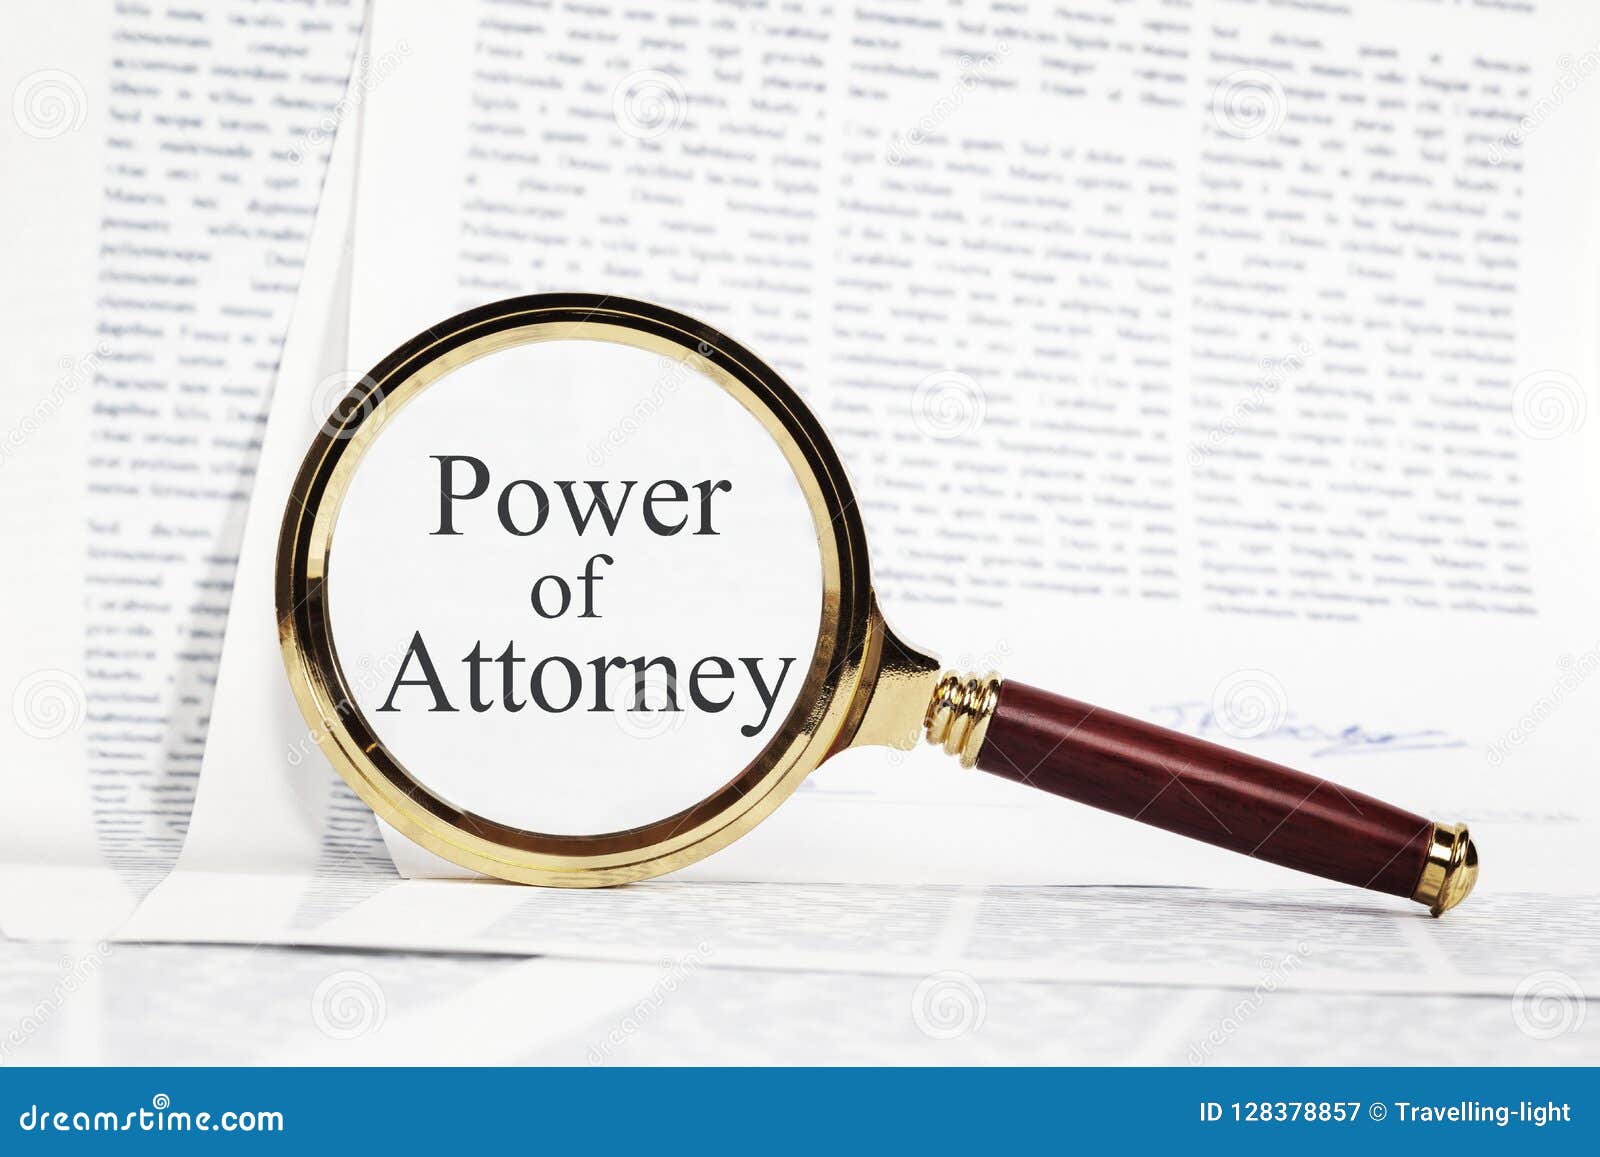 power of attorney concept